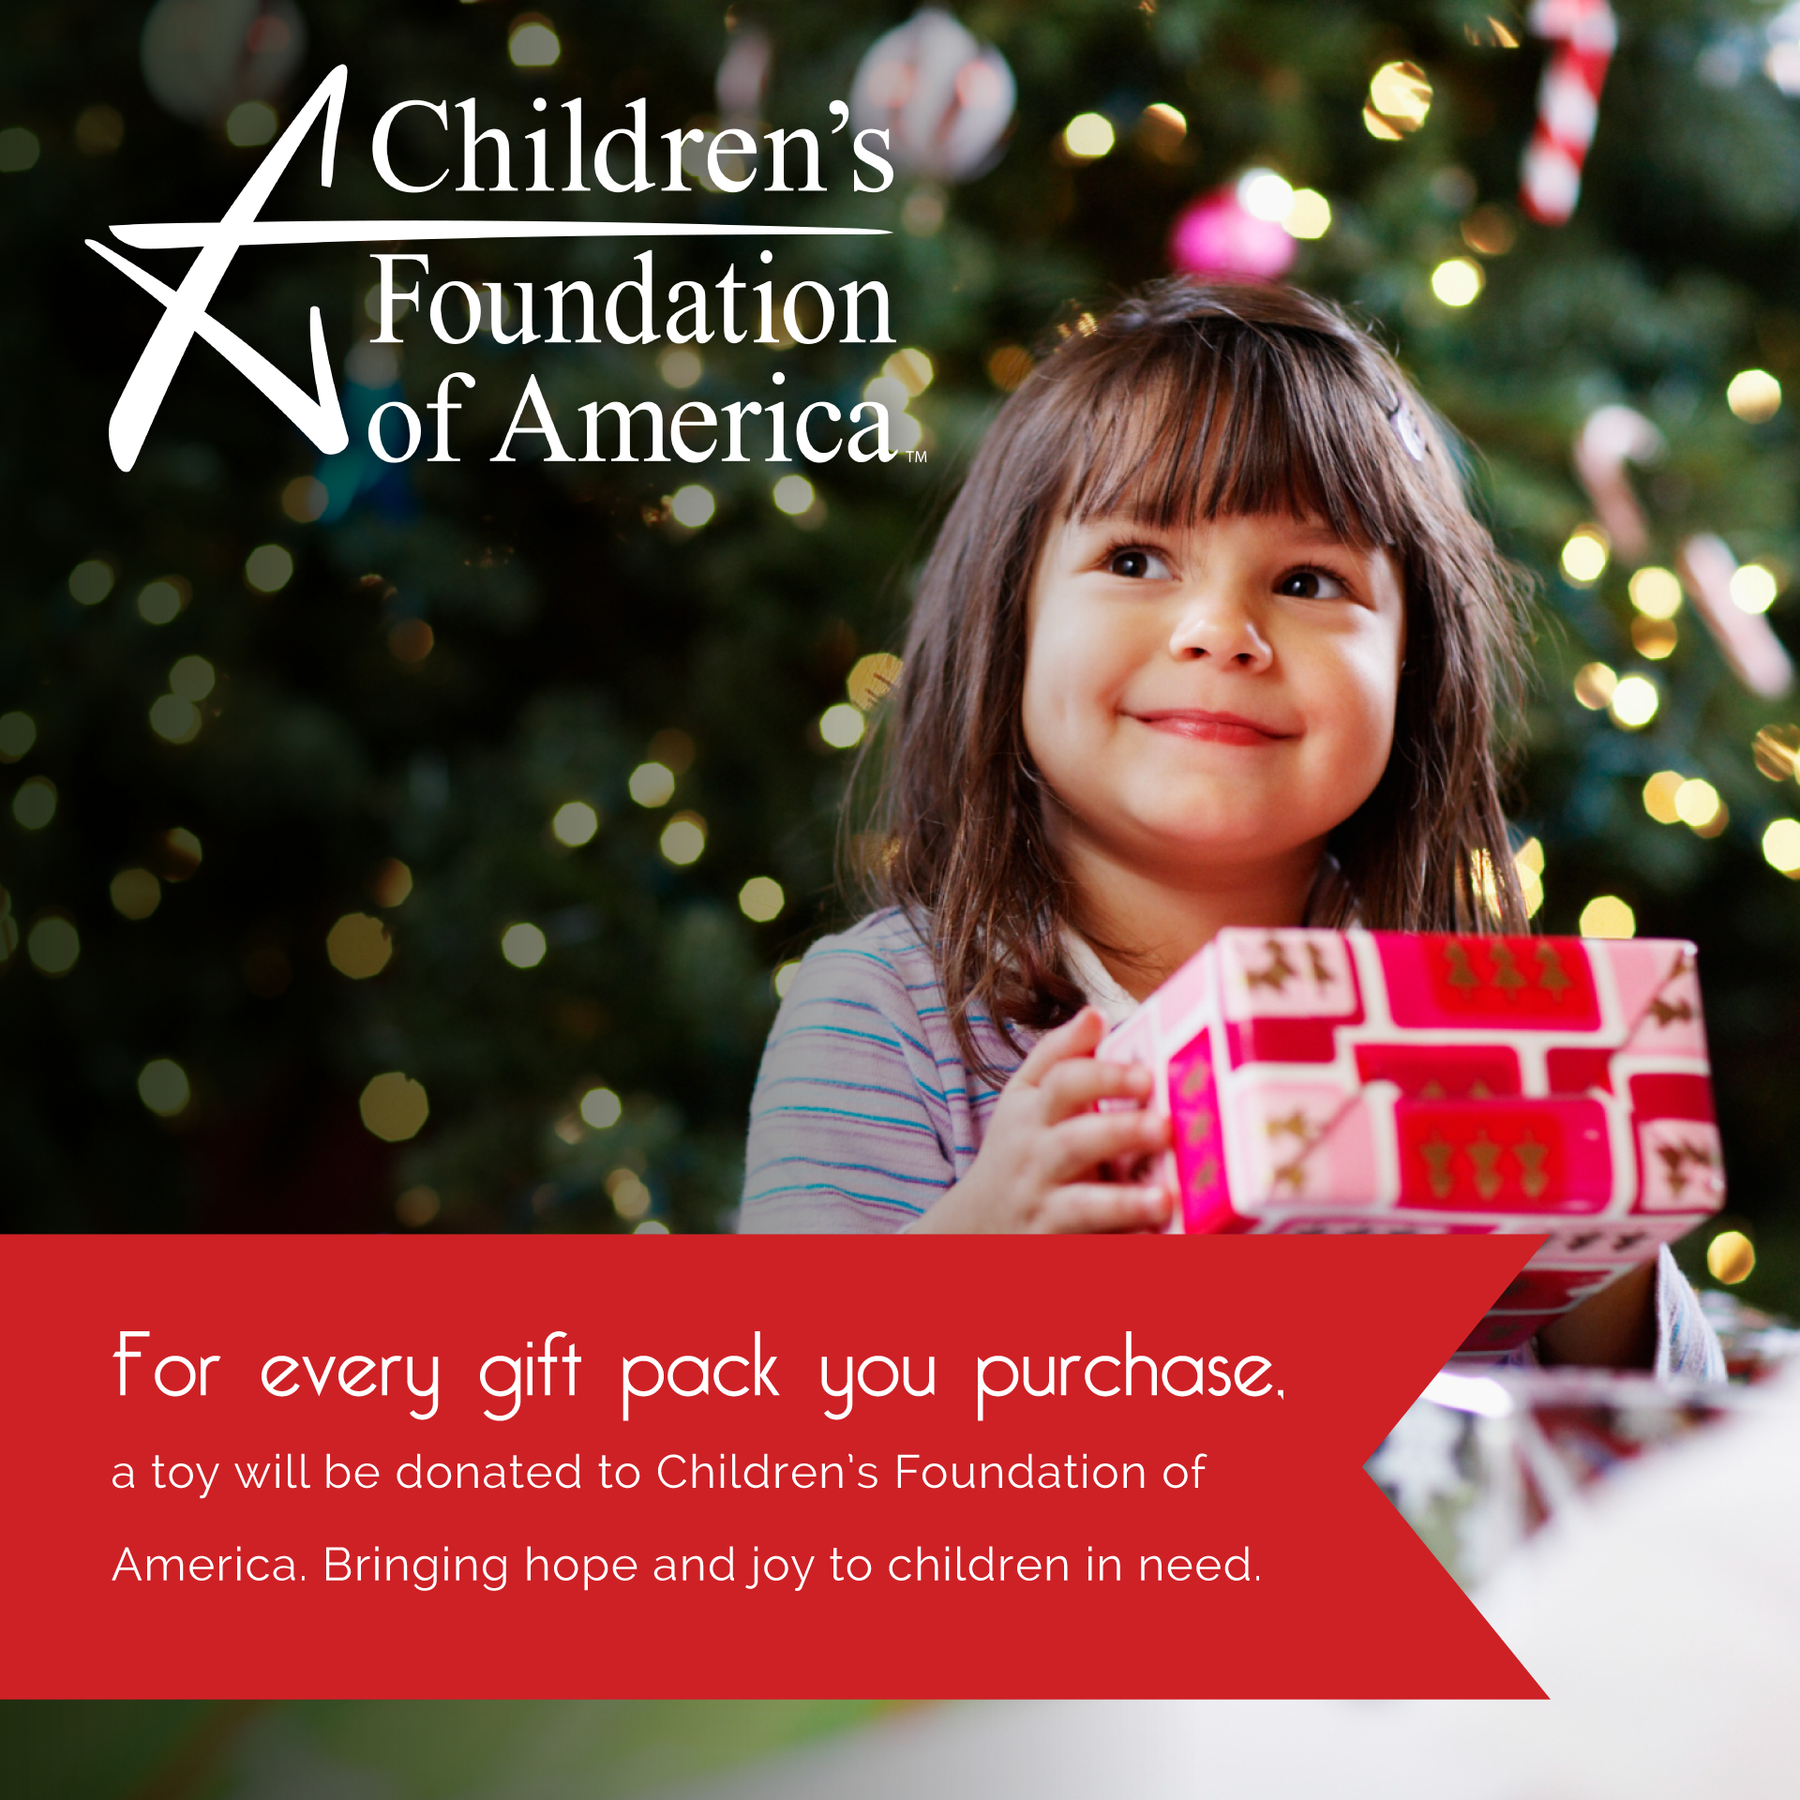 Children's Foundation of America's Annual Holiday Gift Drive